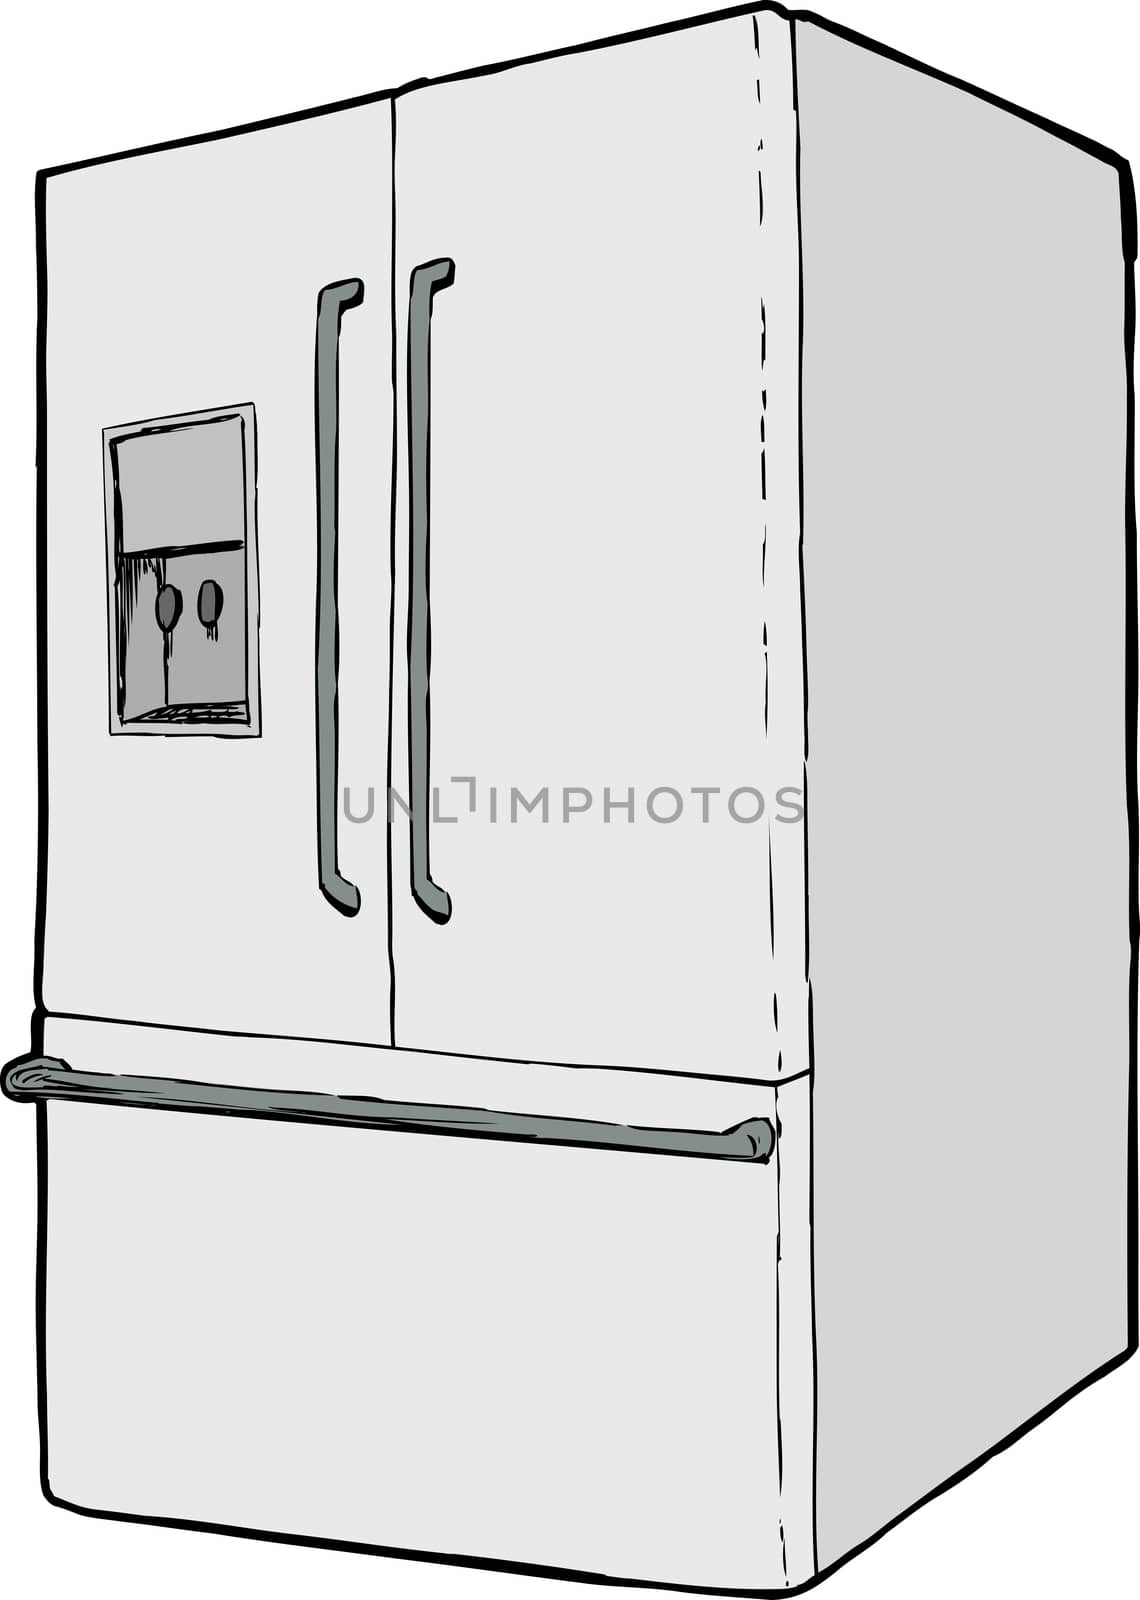 Single refrigerator with water dispenser by TheBlackRhino